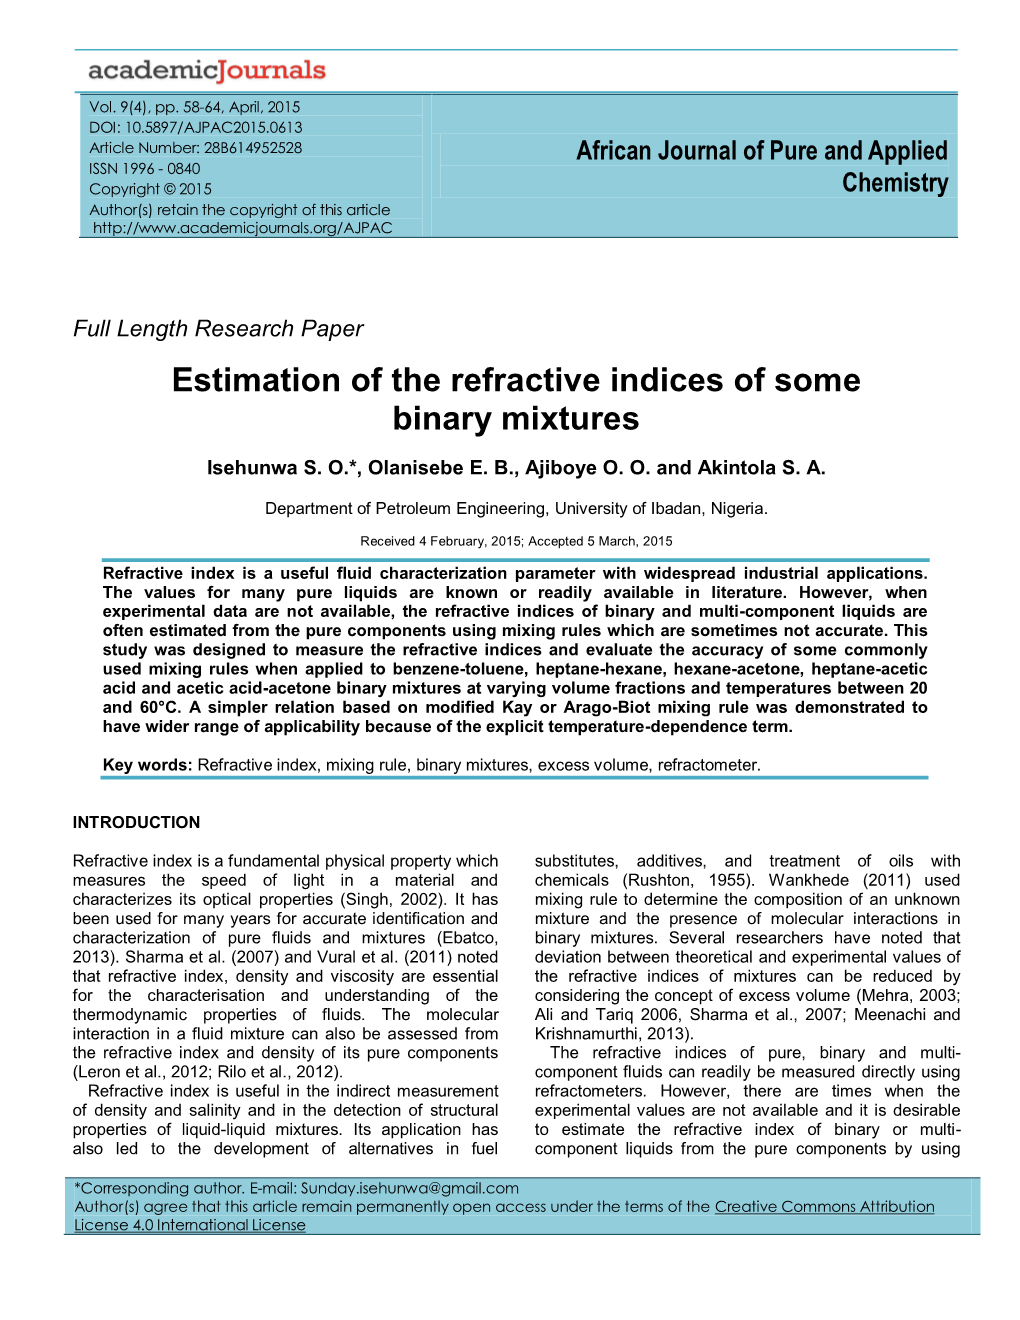 Estimation of the Refractive Indices of Some Binary Mixtures